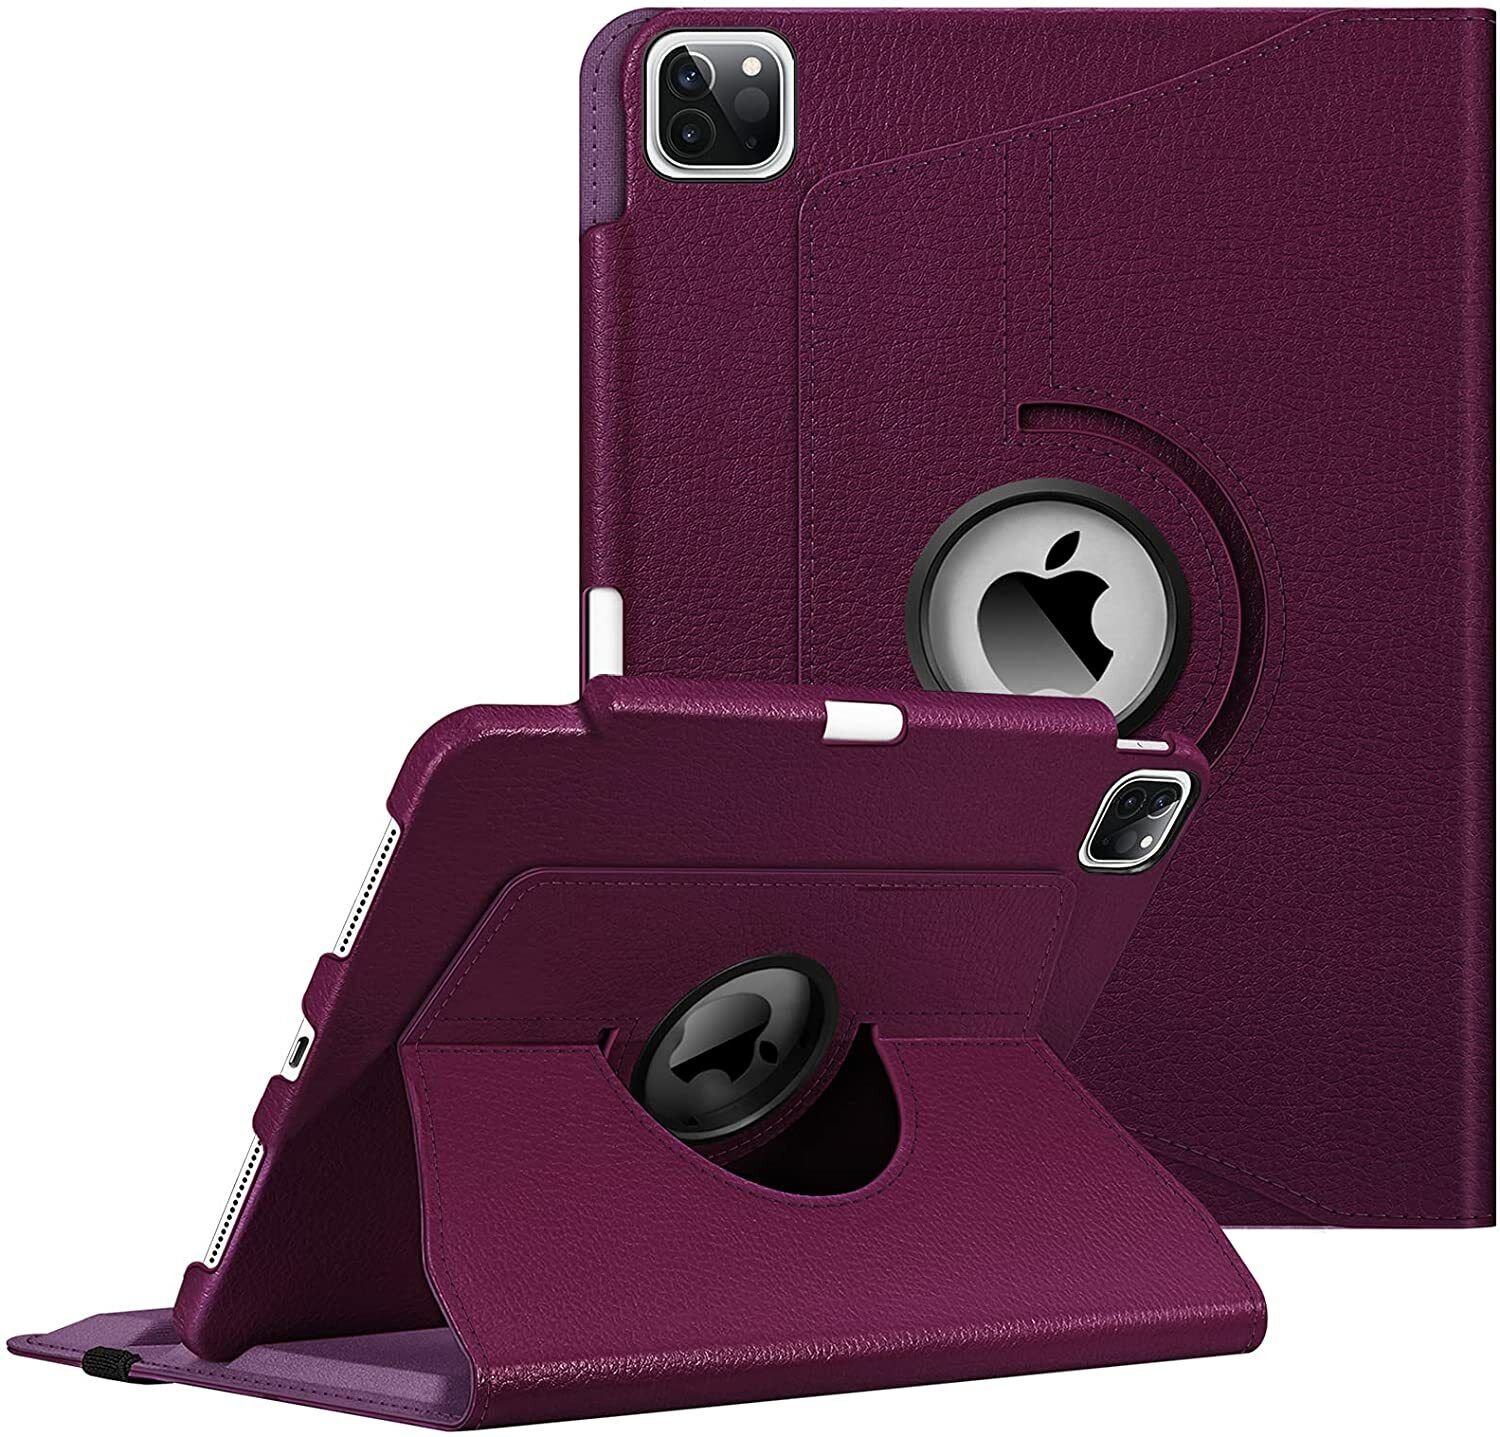 Rotating Case for iPad Pro 11